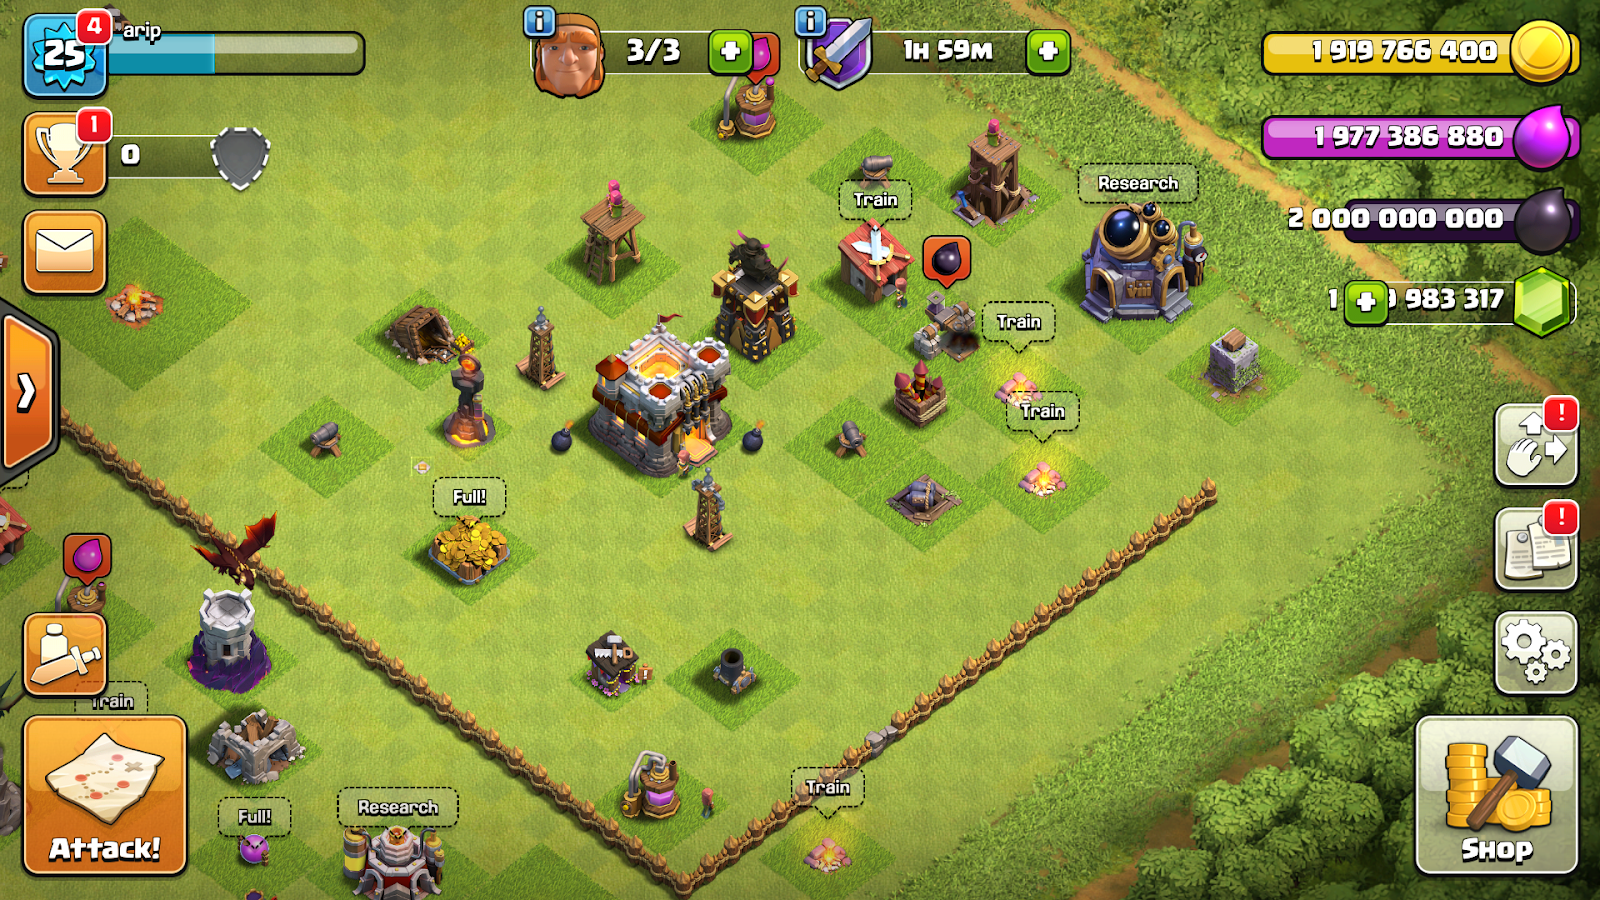 Download game clash of clans for pc